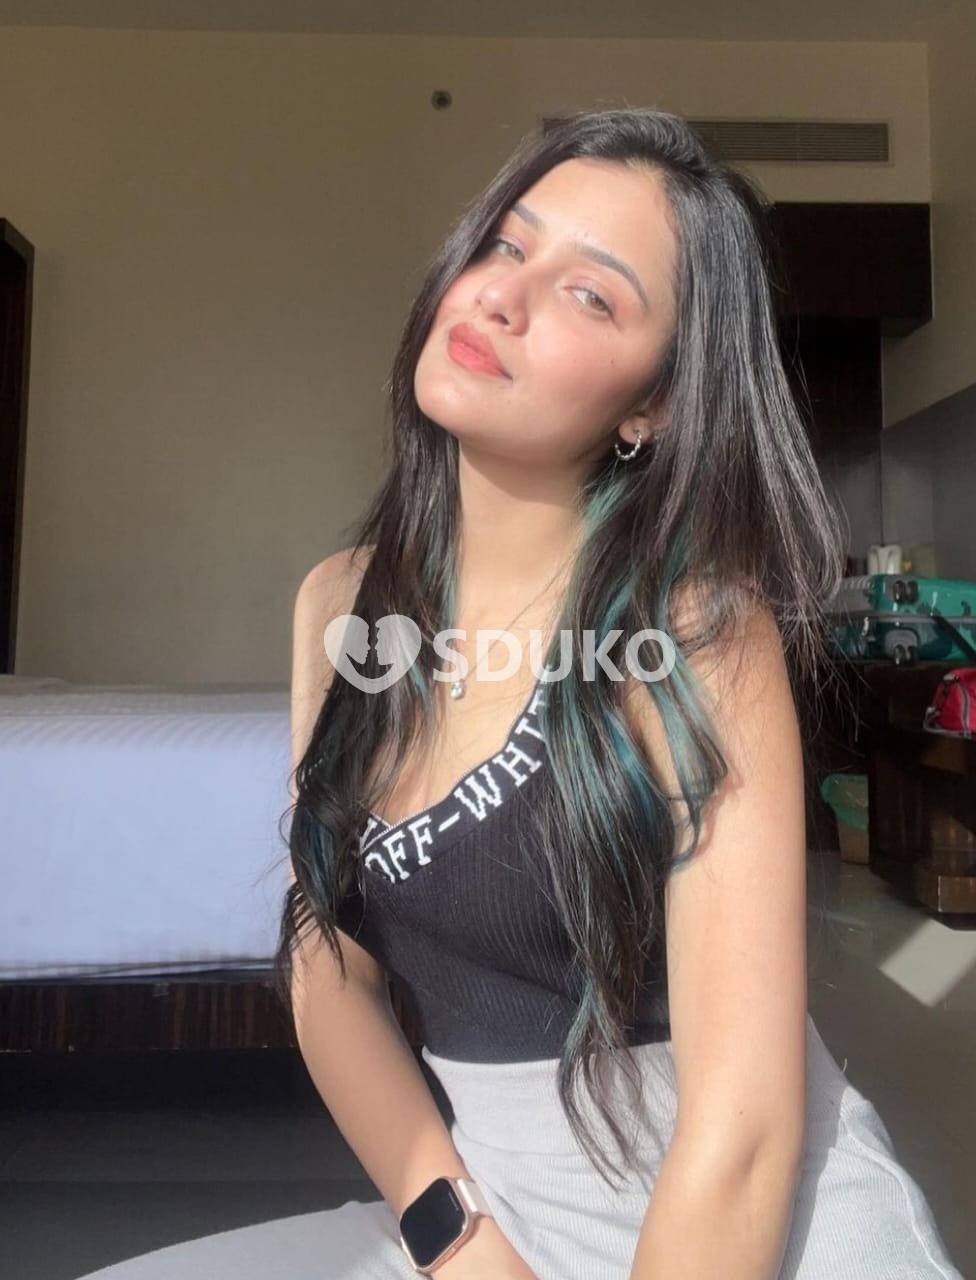 Viman Nagar ✅ (24x7 AFFORDABLE CHEAPEST RATE SAFE CALL GIRL SERVICE AVAILABLE OUTCALL AVAILABLE